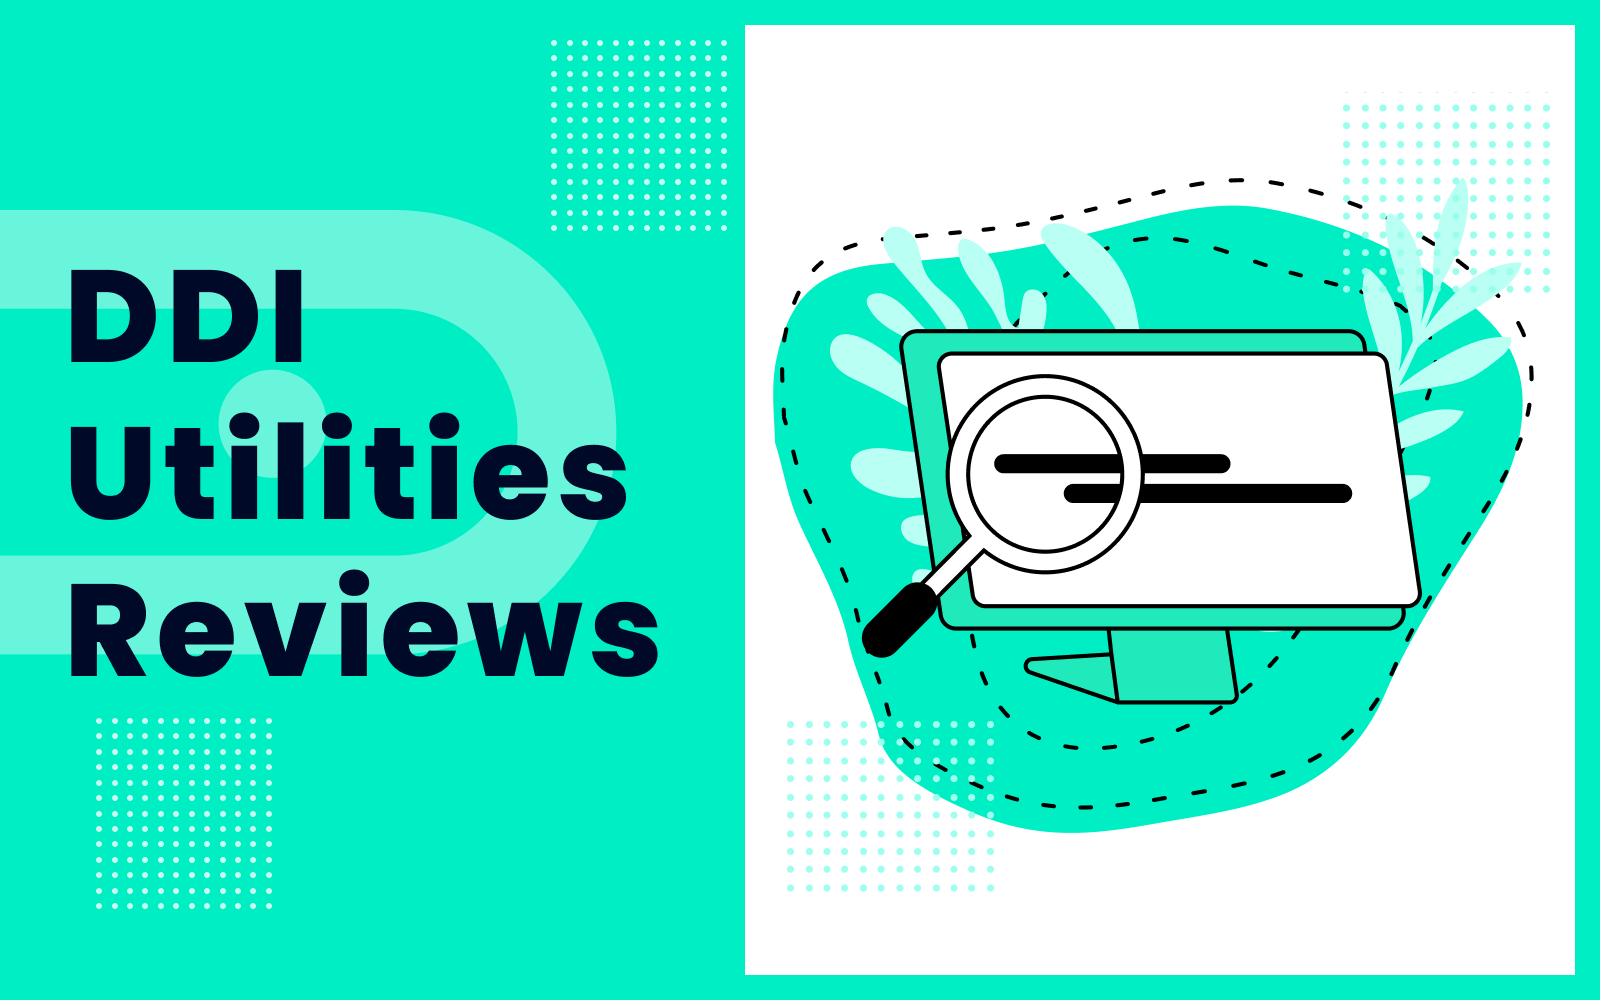 DDI Utilities Reviews 2023: All You Need to Know